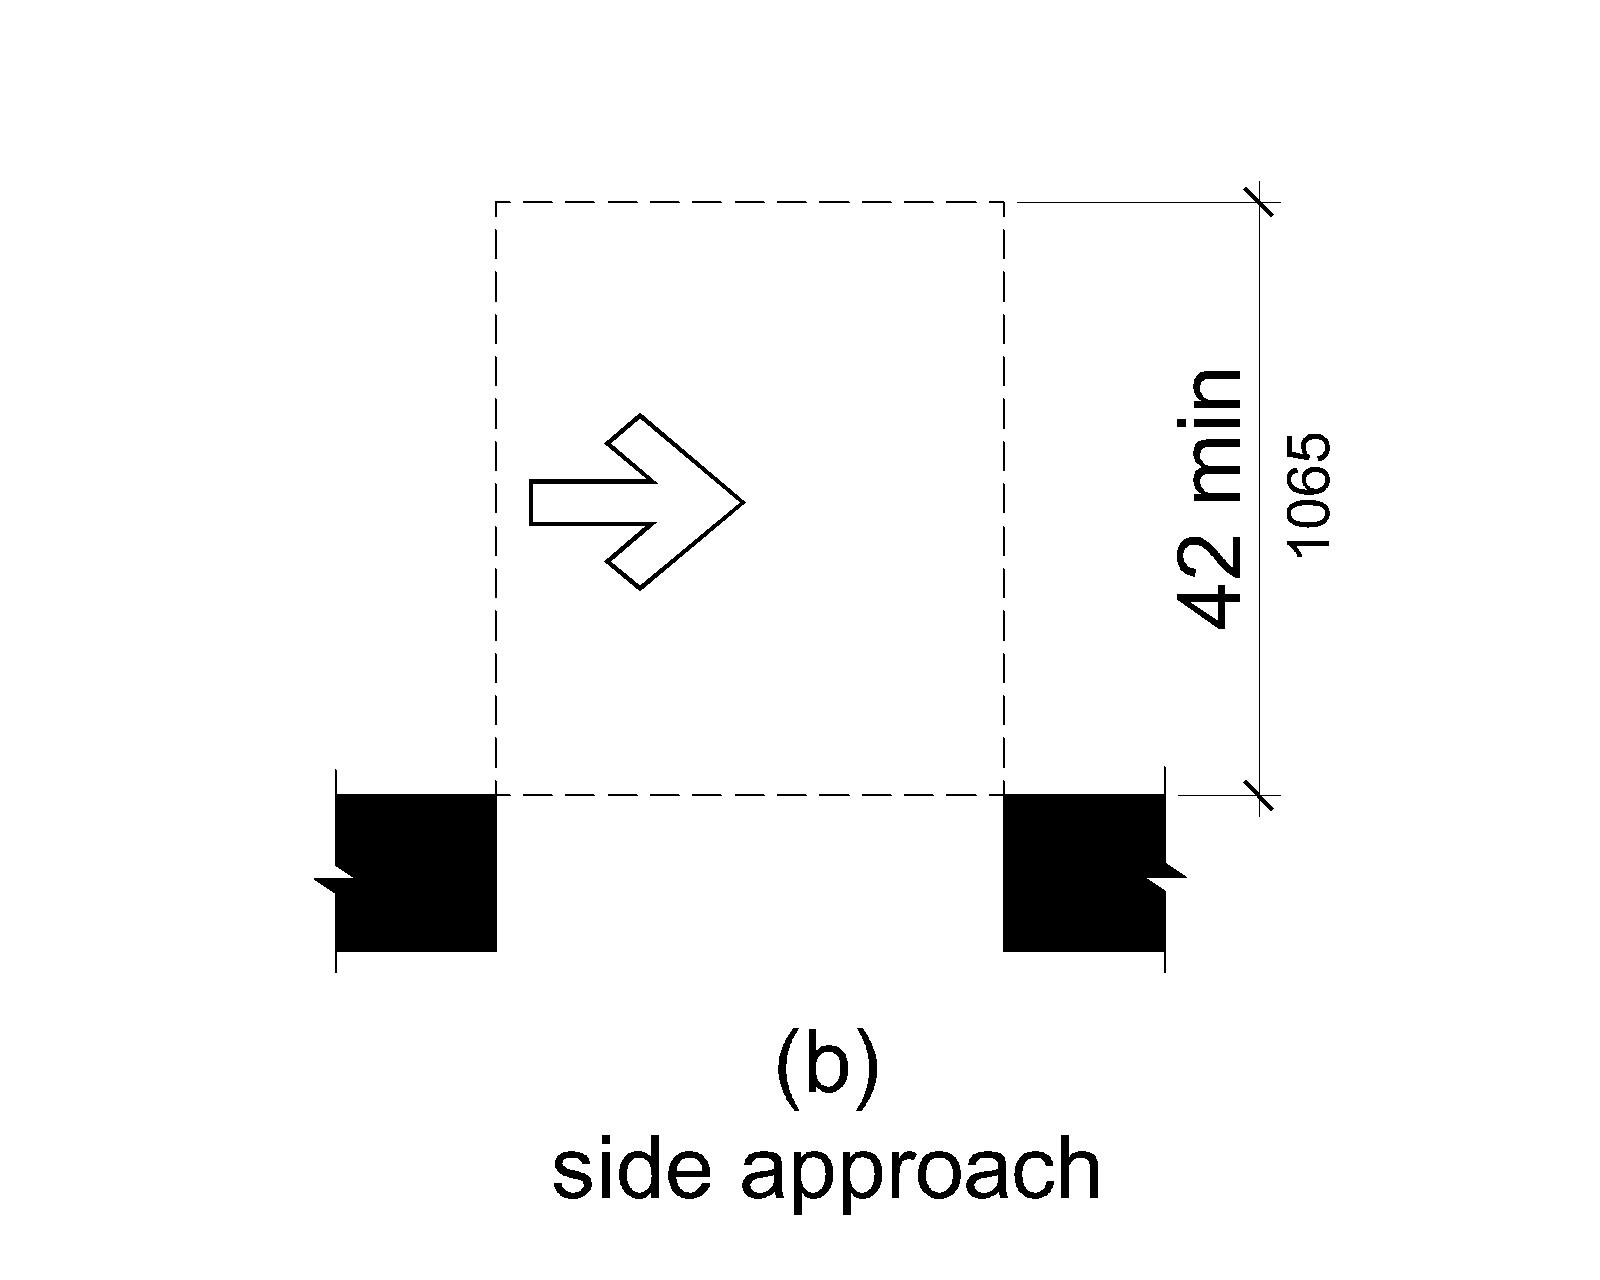 Figure (b) shows a doorway without a door. For a side approach, maneuvering clearance is as wide as the doorway and 42 inches (1065 mm) minimum perpendicular to the doorway.